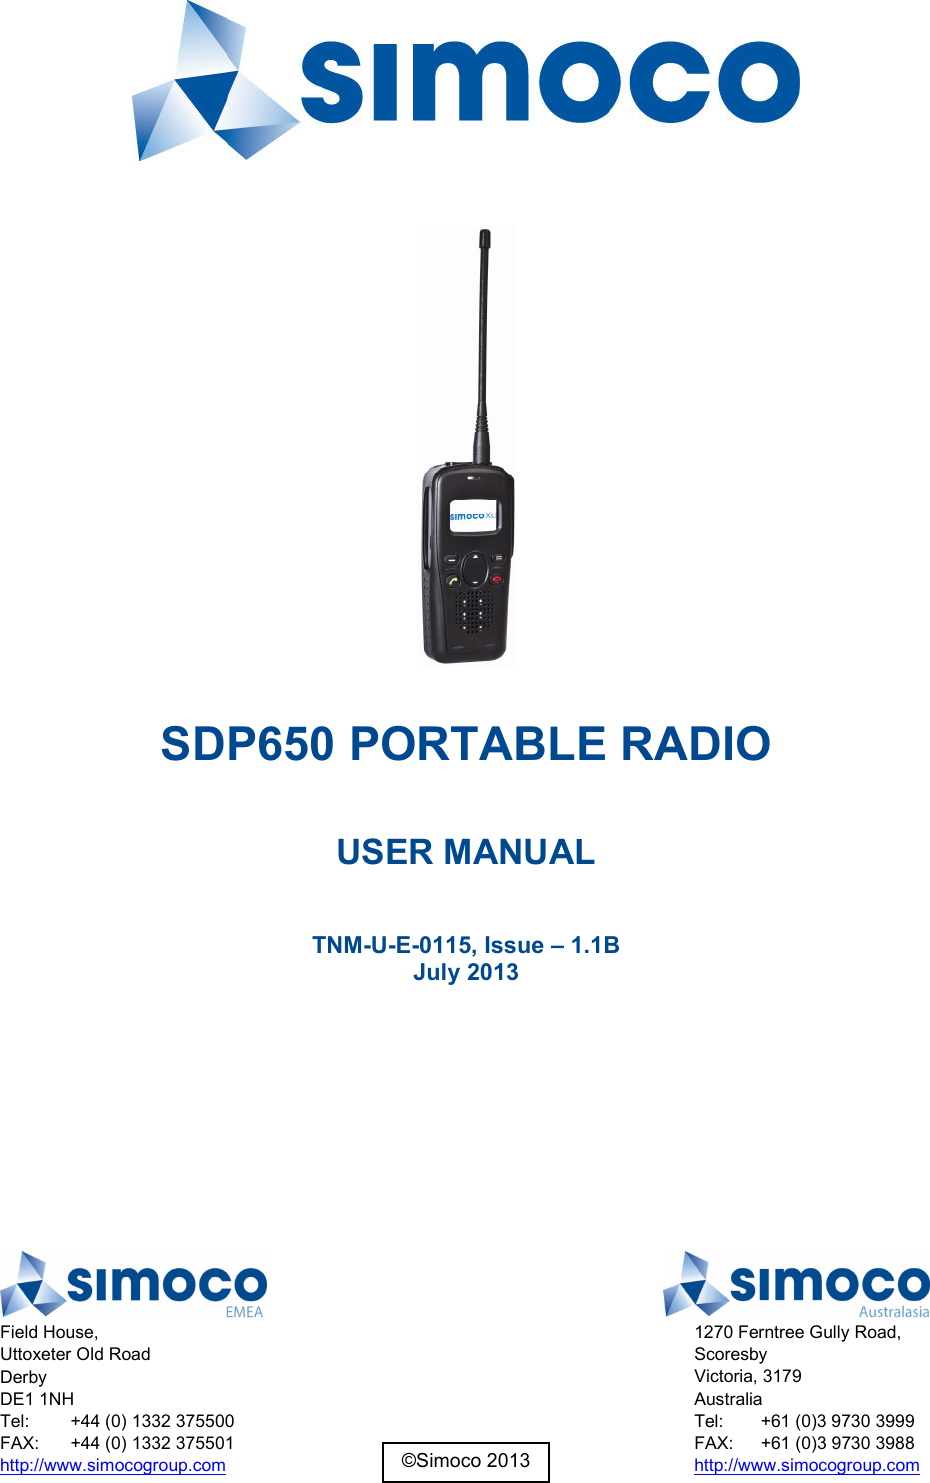    SDP650 PORTABLE RADIO  USER MANUAL  TNM-U-E-0115, Issue – 1.1B July 2013    Field House, Uttoxeter Old Road Derby DE1 1NH Tel:  +44 (0) 1332 375500 FAX:  +44 (0) 1332 375501 http://www.simocogroup.com  1270 Ferntree Gully Road, Scoresby Victoria, 3179 Australia Tel:  +61 (0)3 9730 3999 FAX:  +61 (0)3 9730 3988 http://www.simocogroup.com ©Simoco 2013 